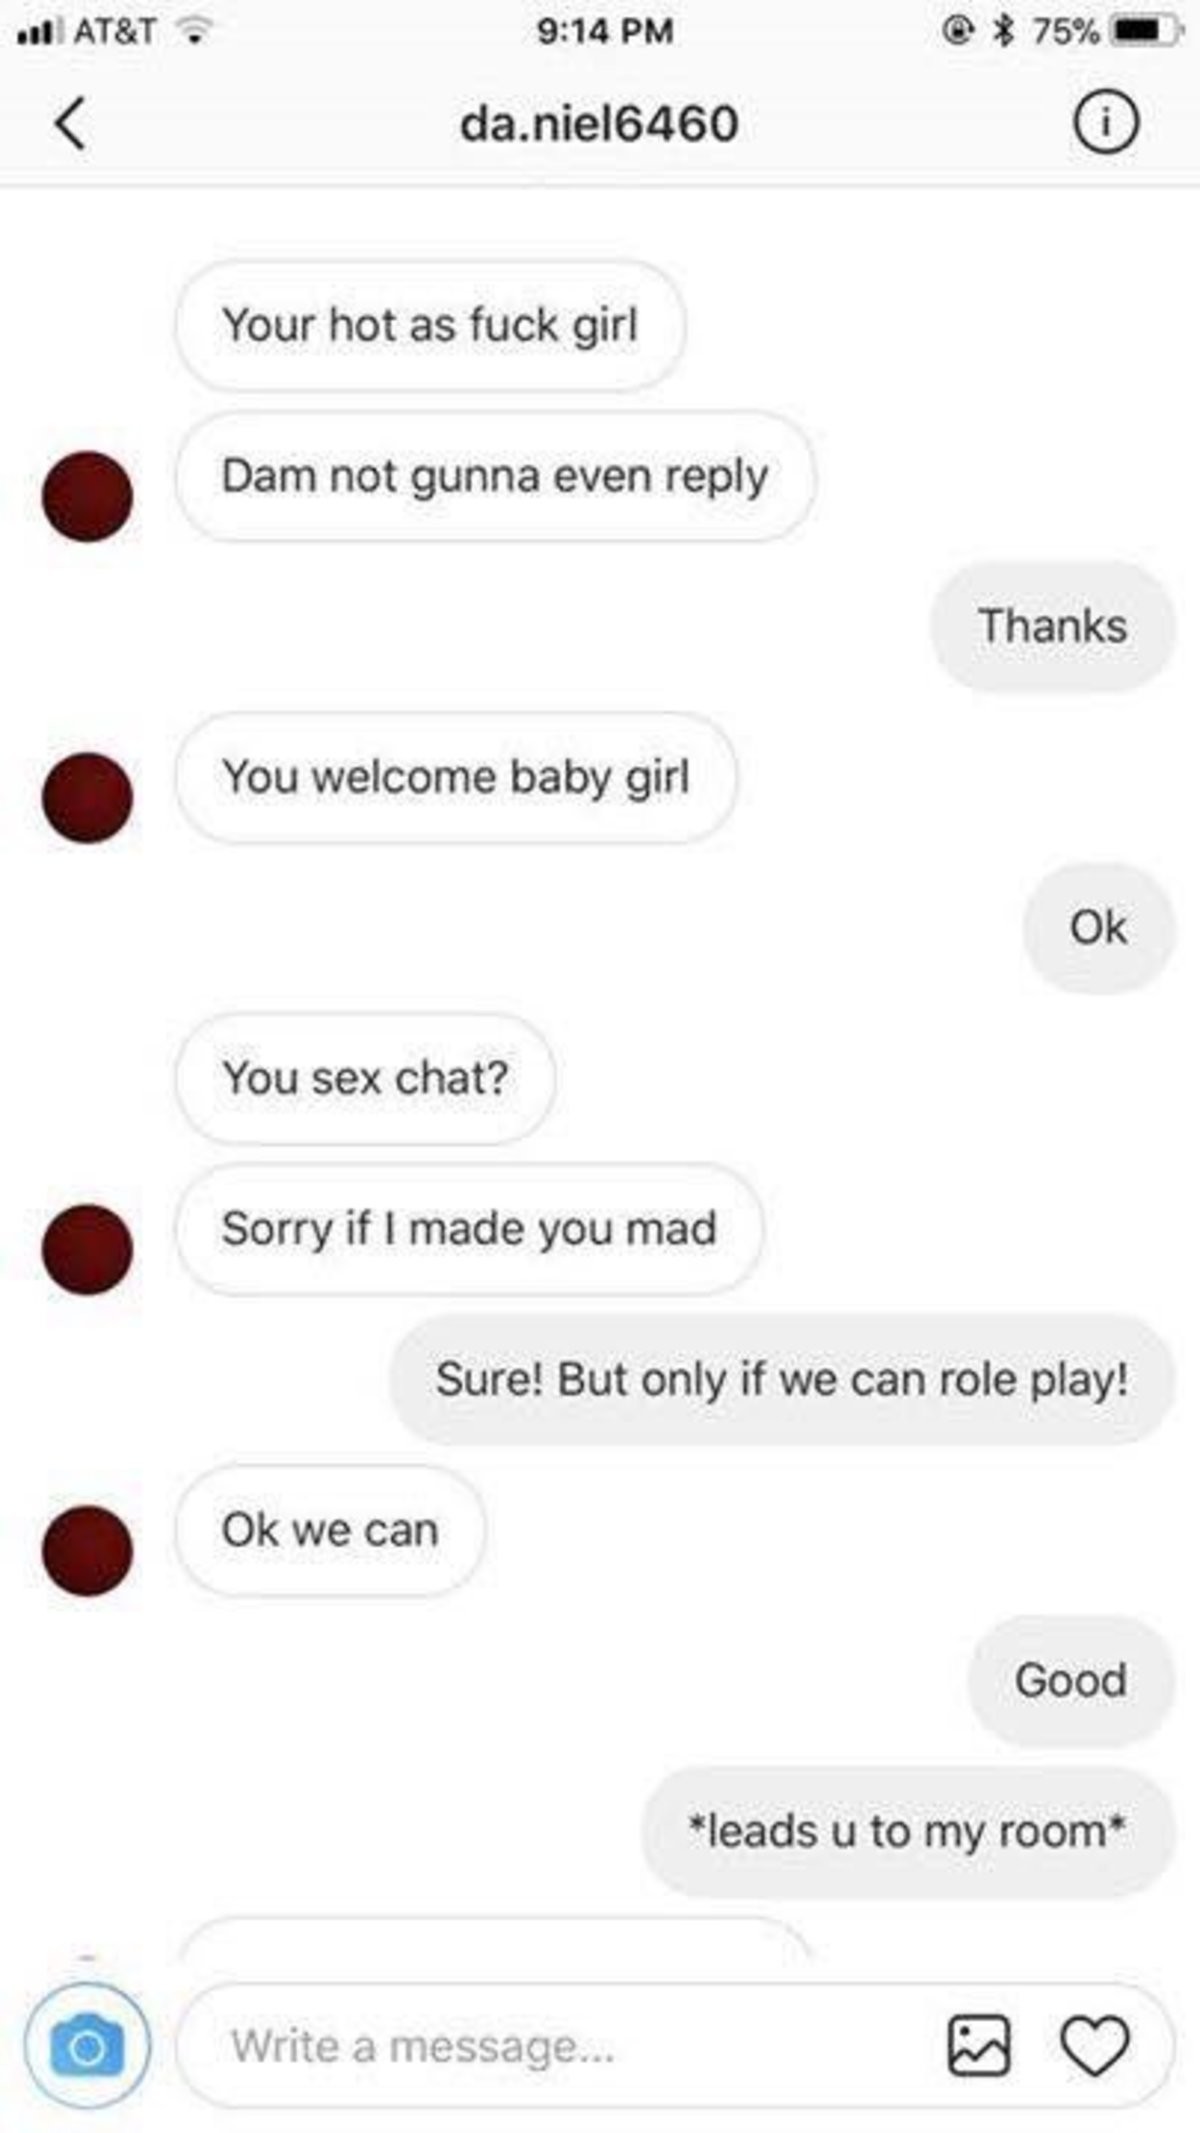 Only sex chat